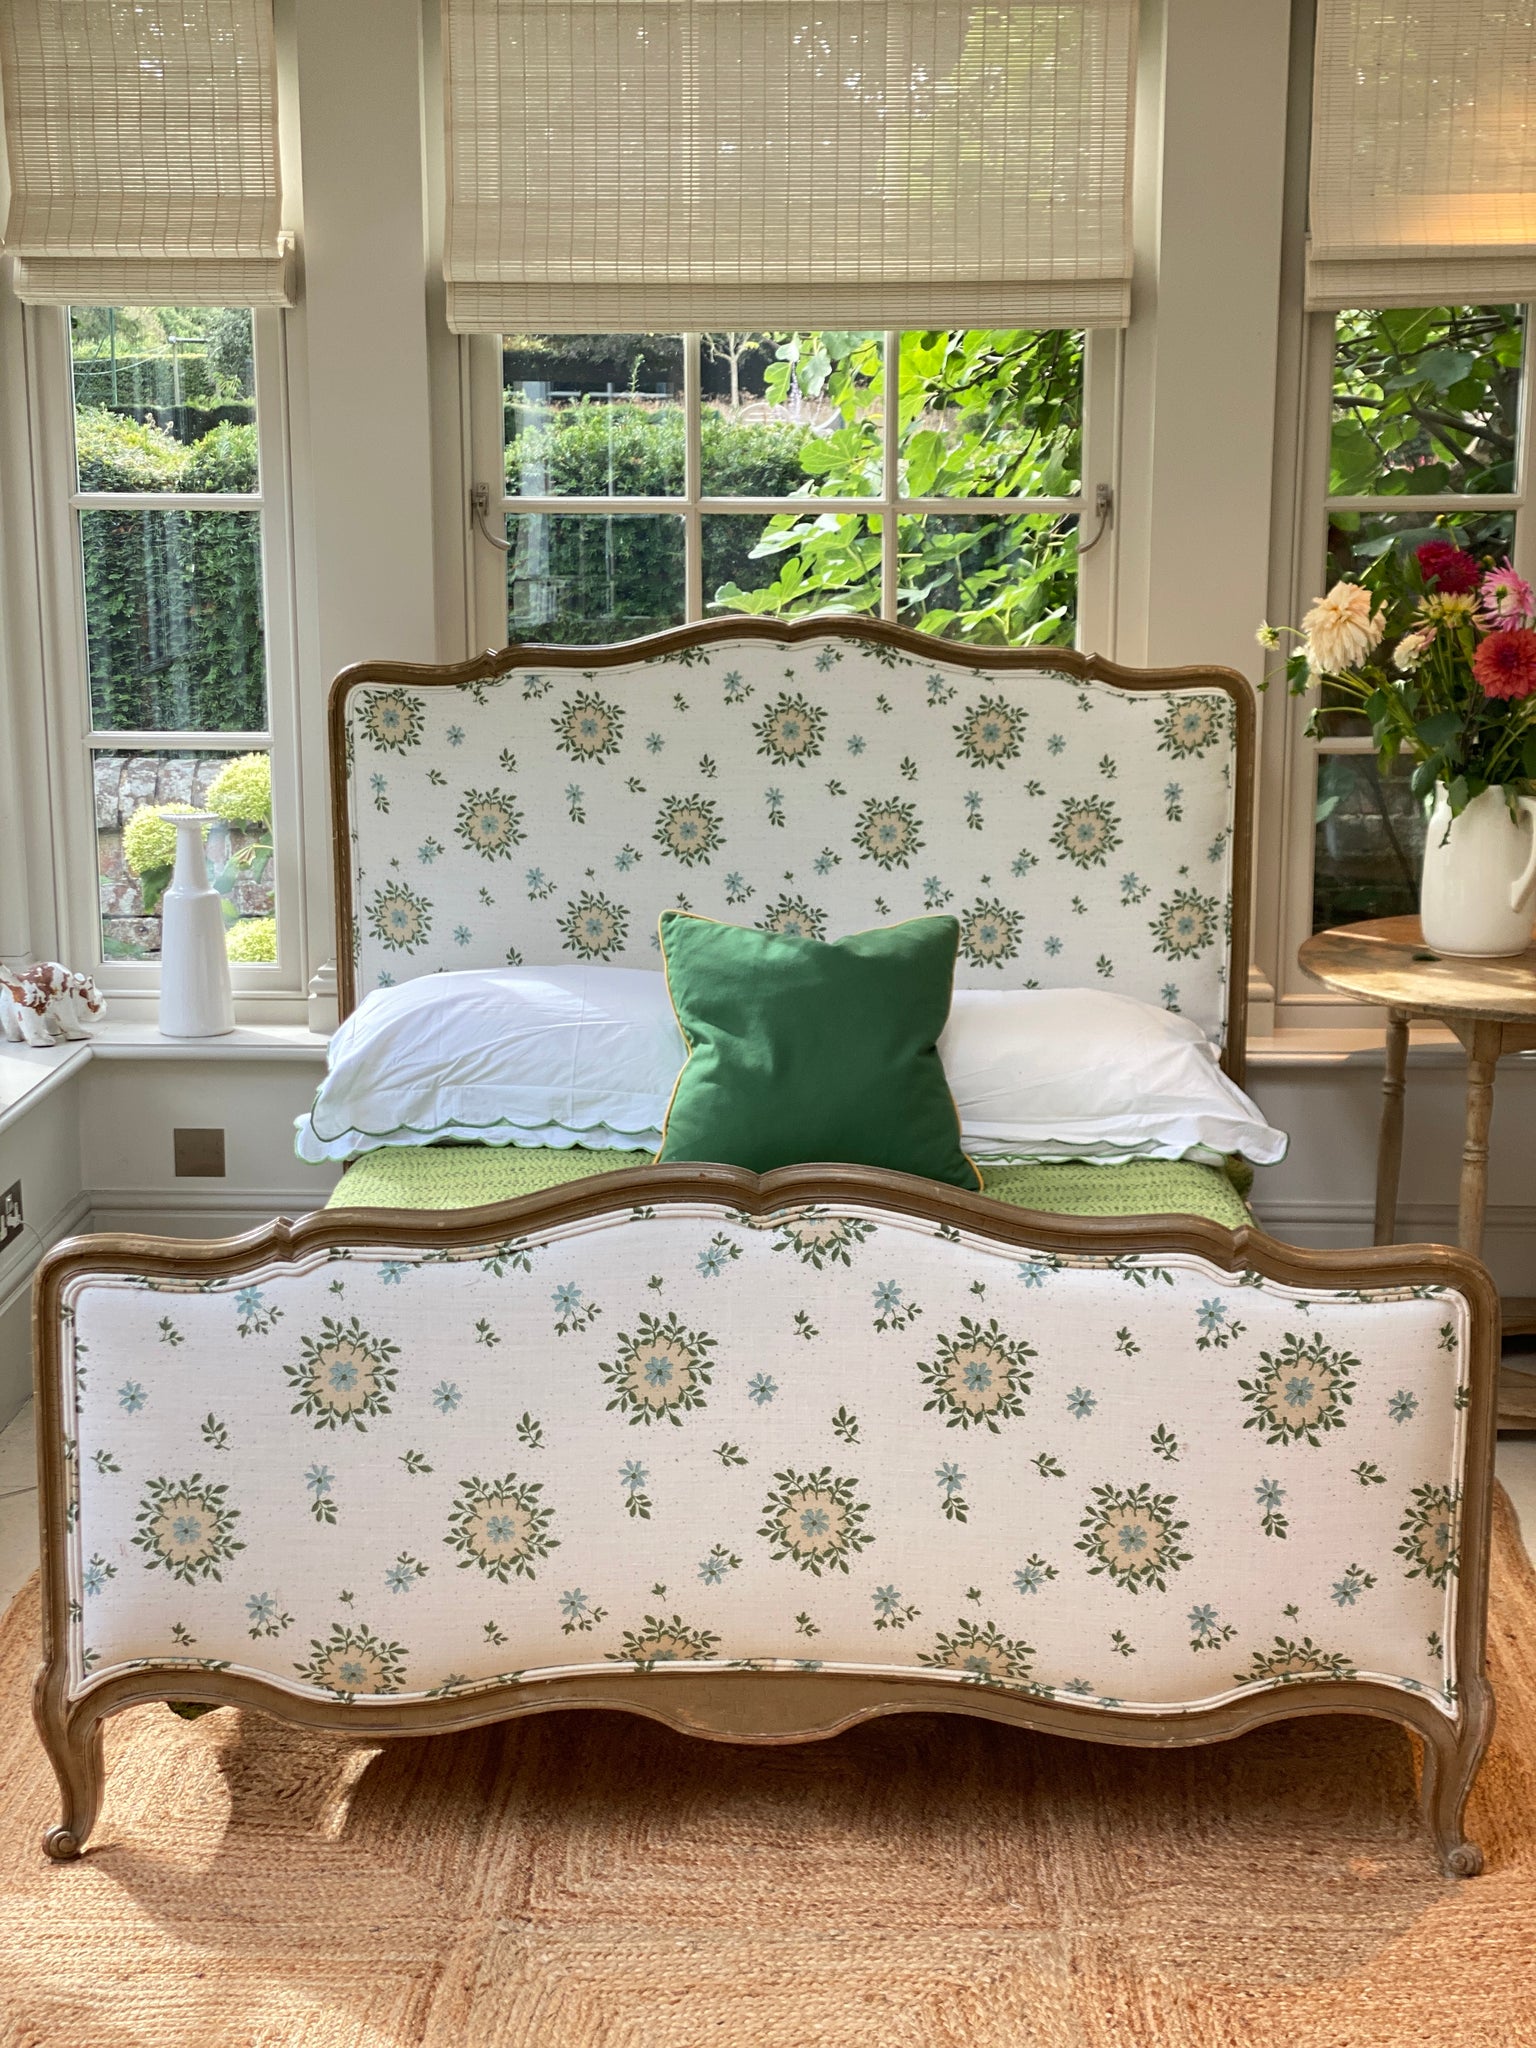 19th Century French Bed Upholstered in Leah O’Connell Odette